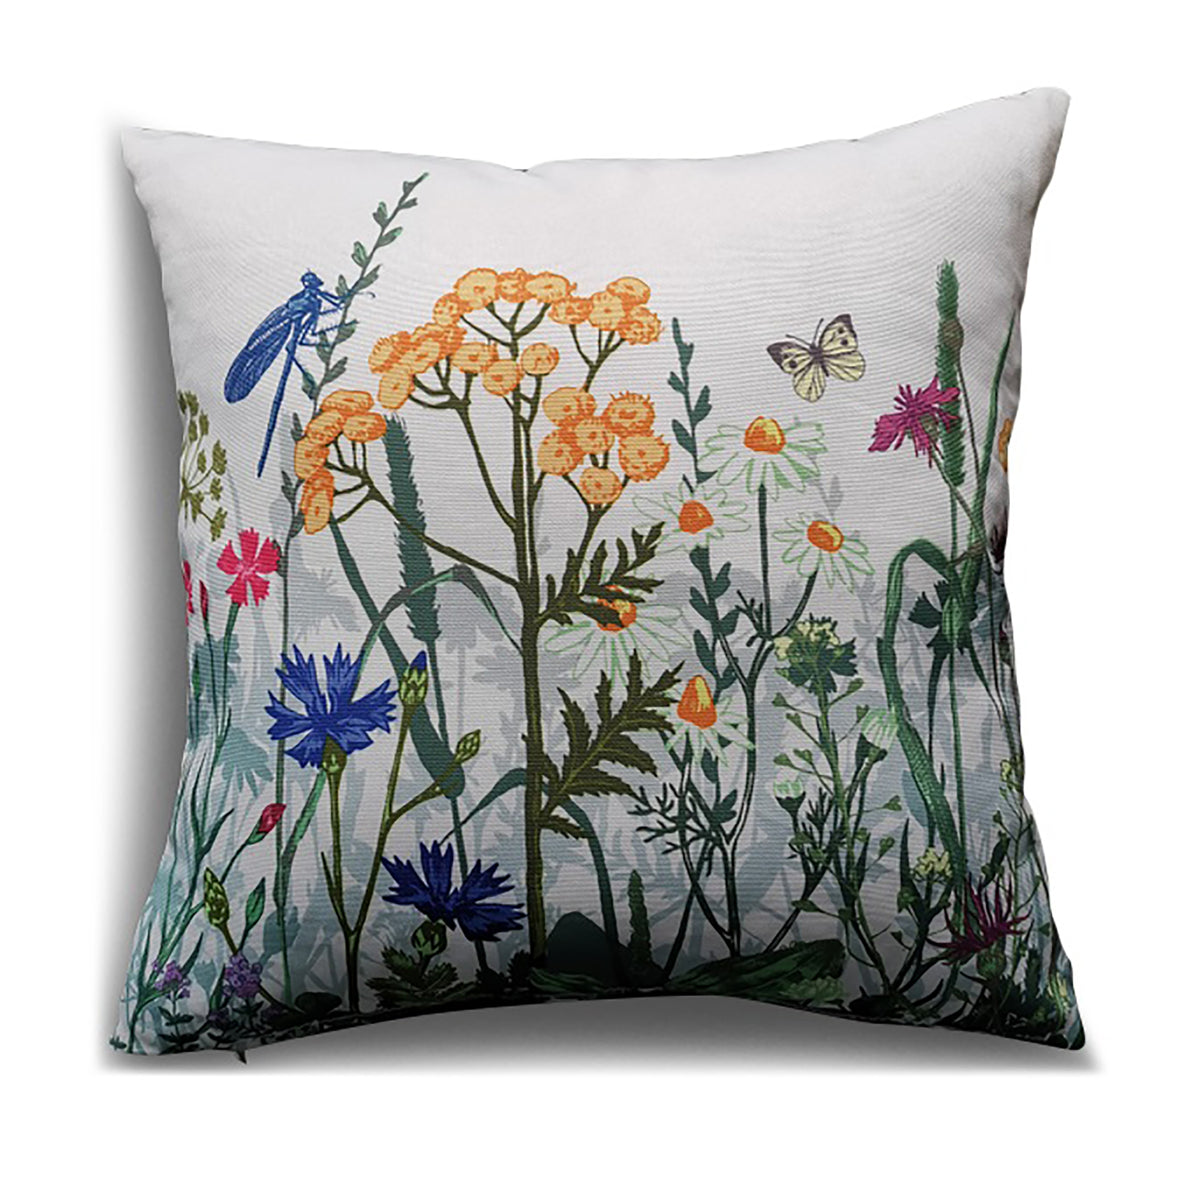 LG Outdoor Summer Meadow Scatter Cushion